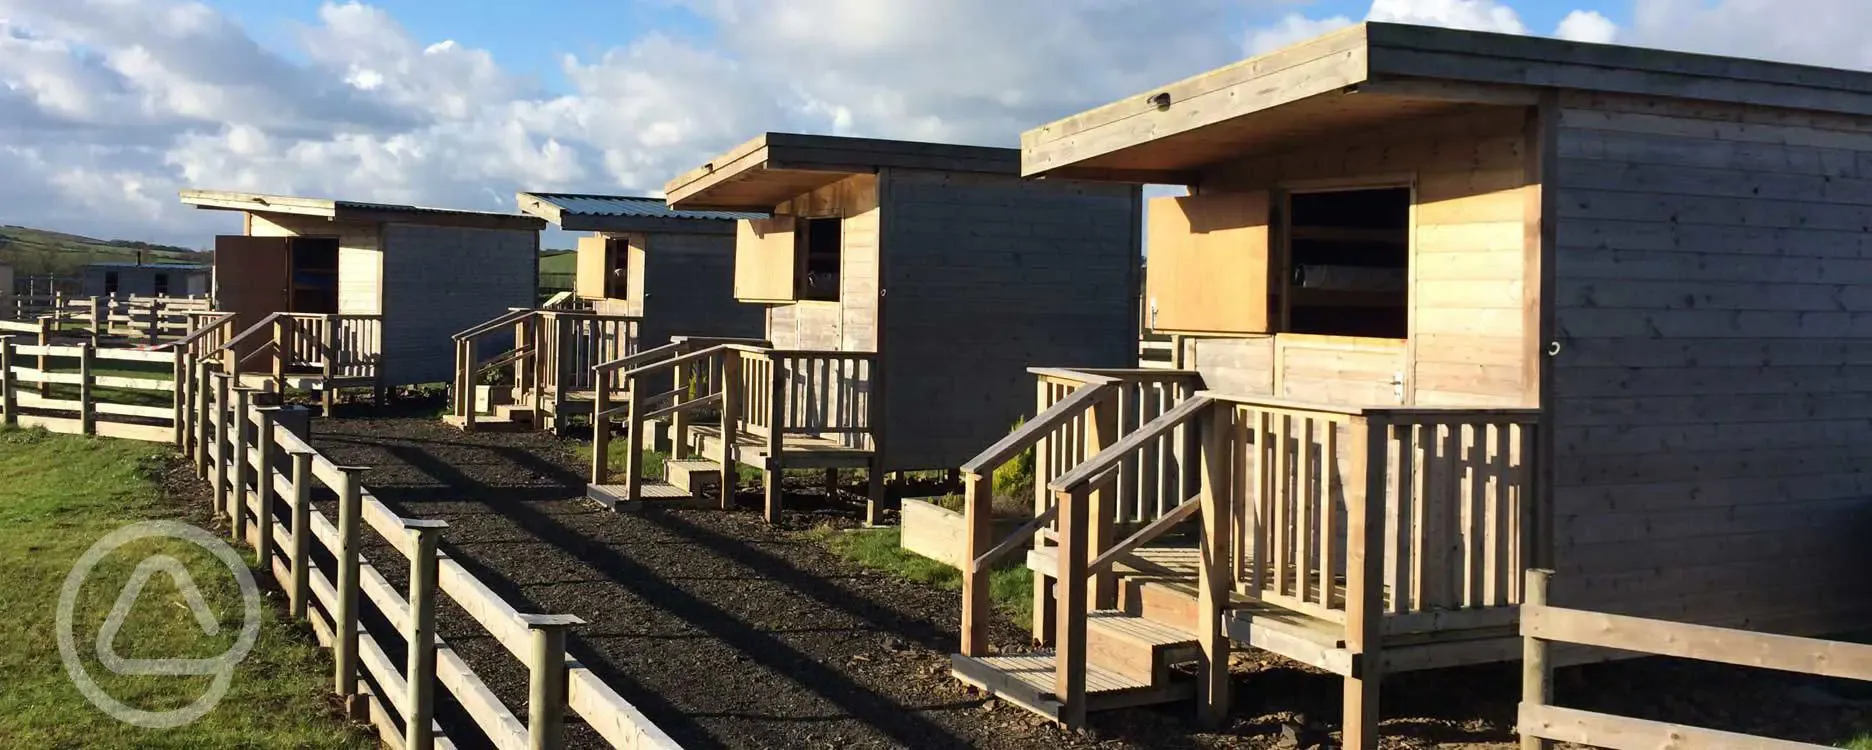 Timber Huts at The Adventure Centre